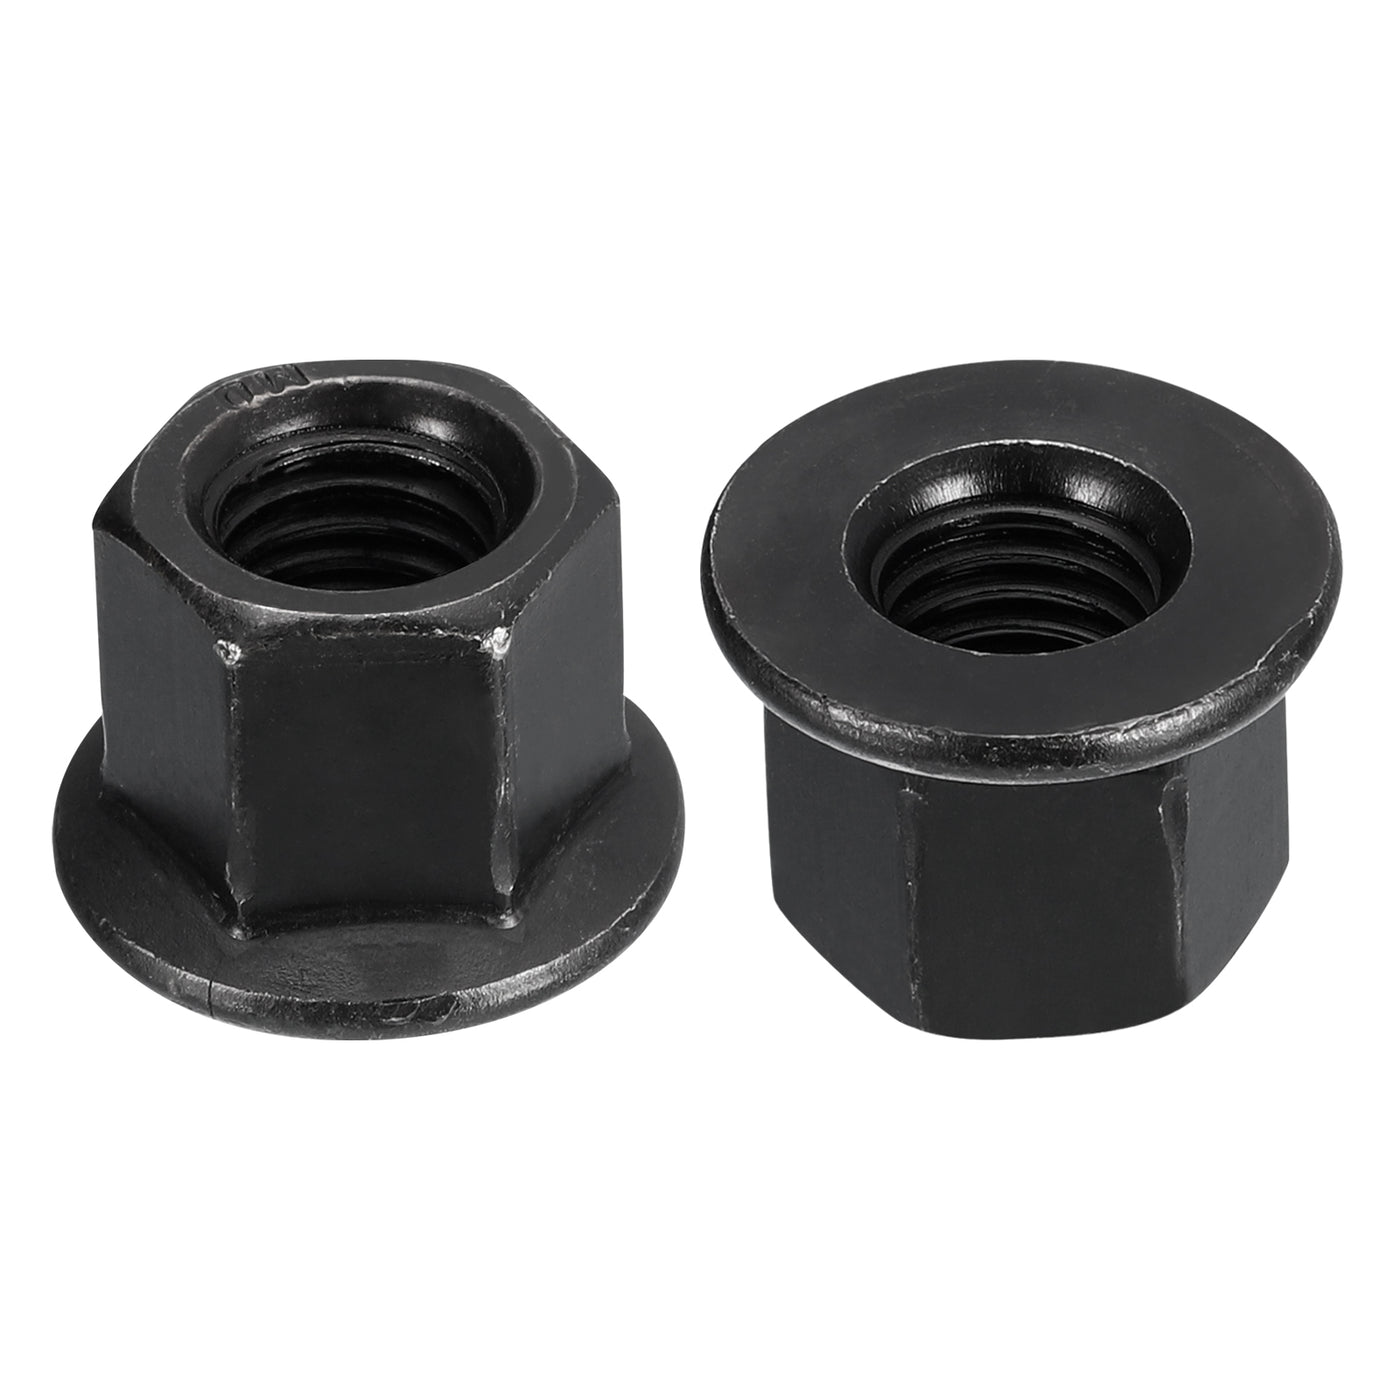 uxcell Uxcell M12 Flange Hex Lock Nuts, 2pcs Grade 8.8 Carbon Steel Hex Flange Nuts